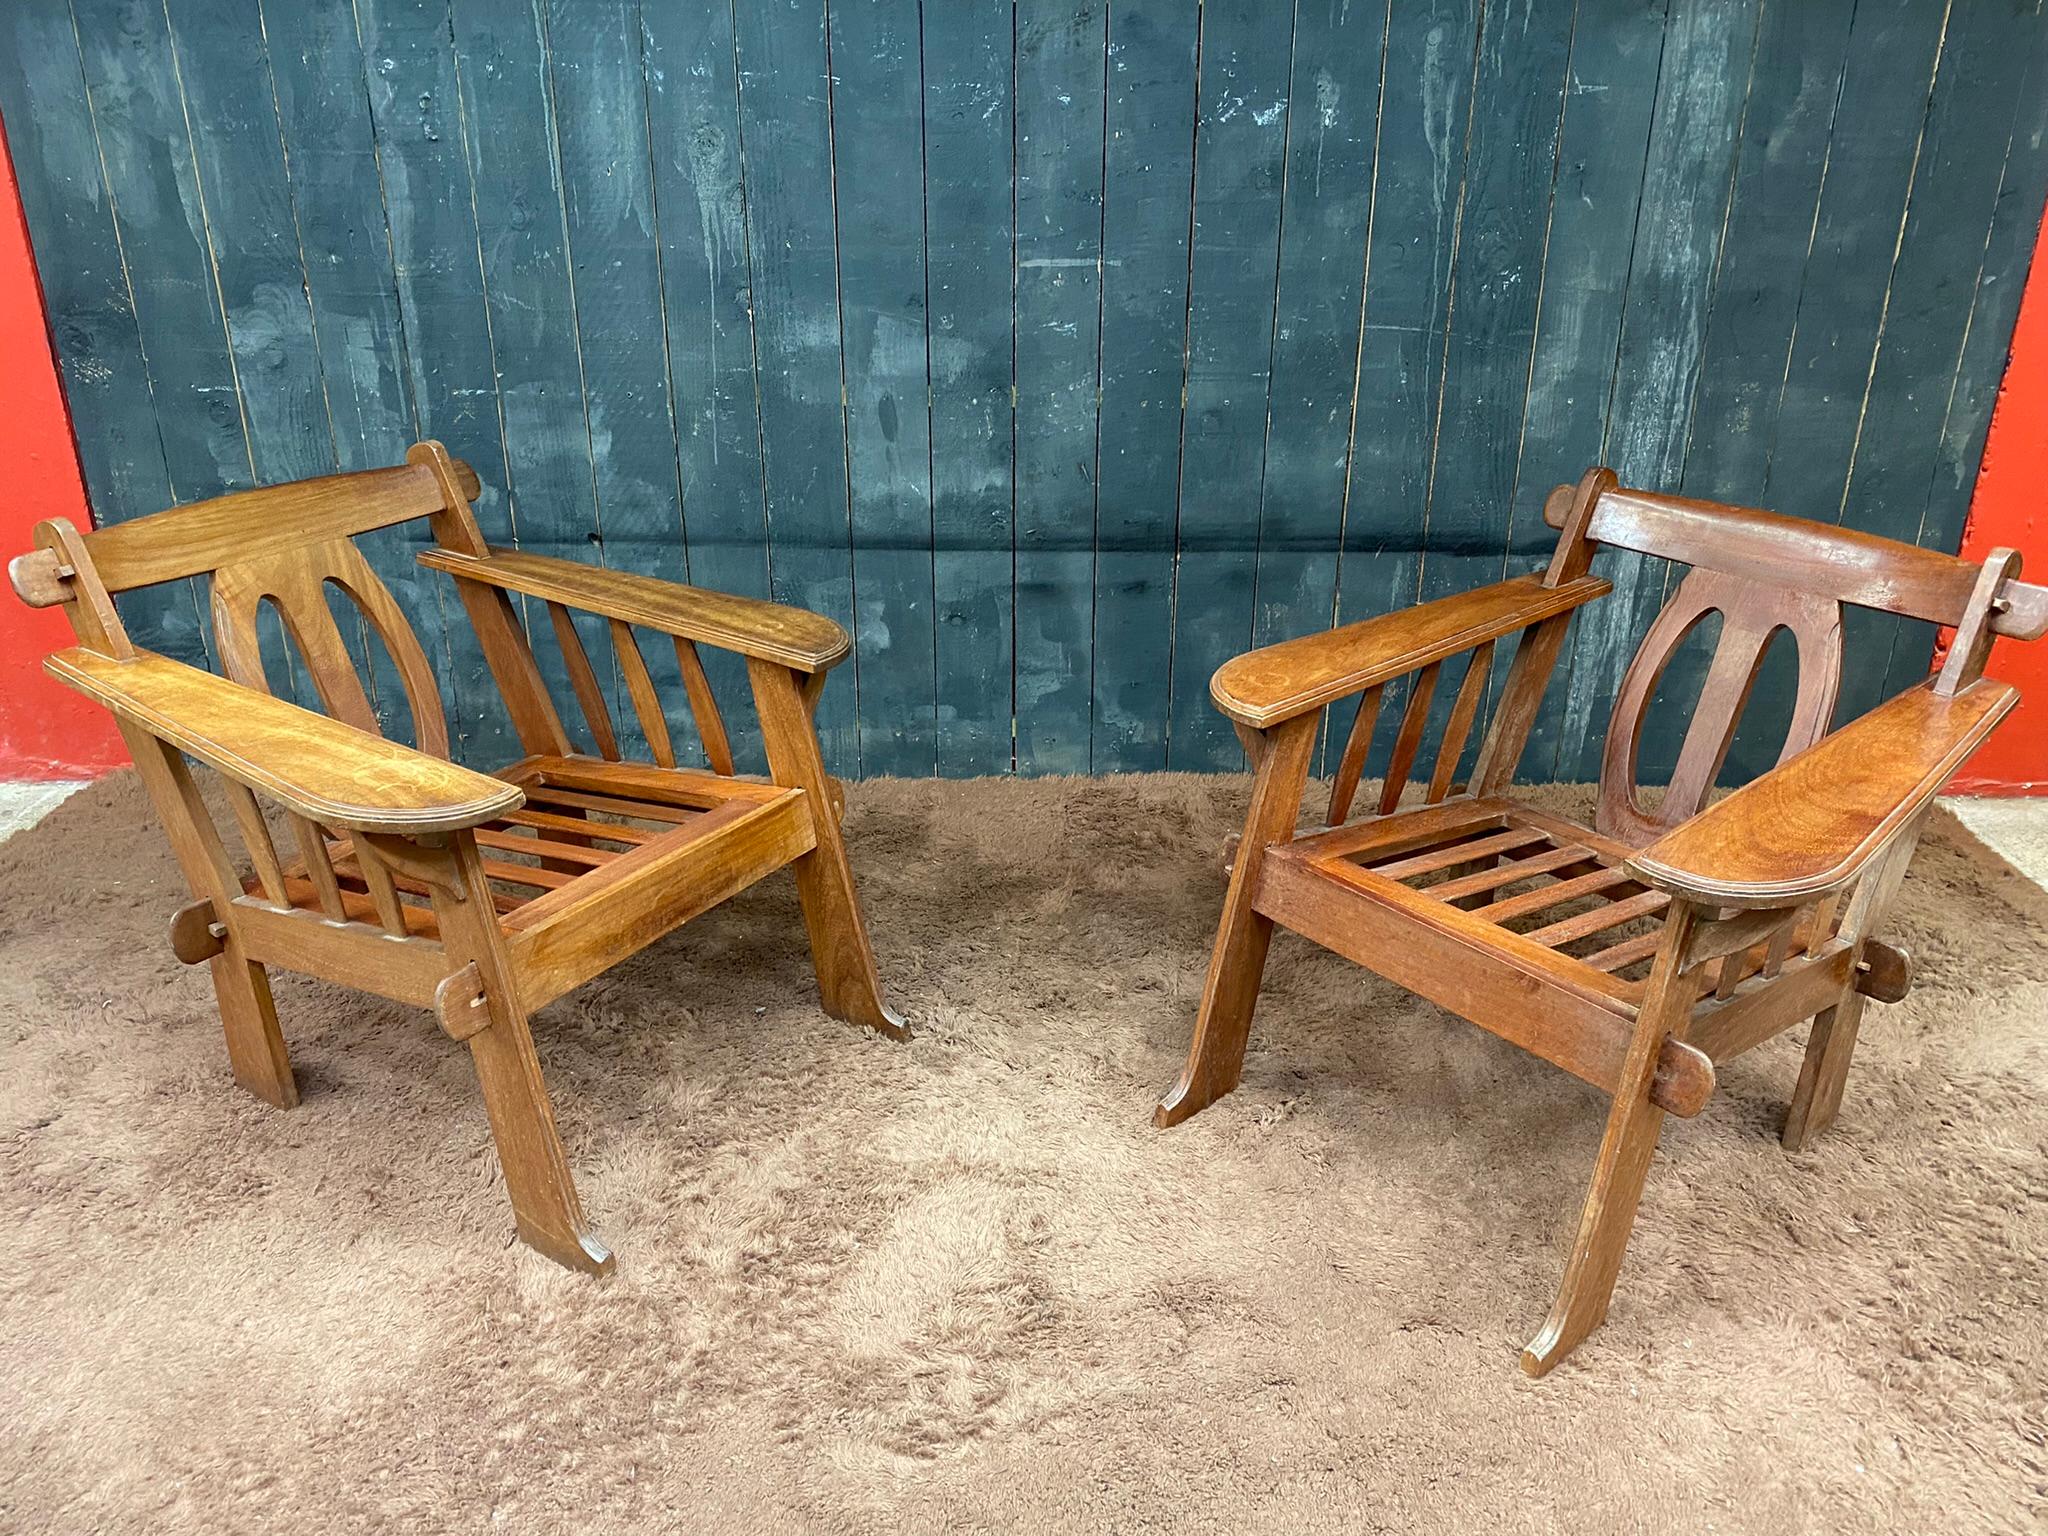 pair of Arts & Crafts style armchairs in teak, circa 1950.
price is for the pair